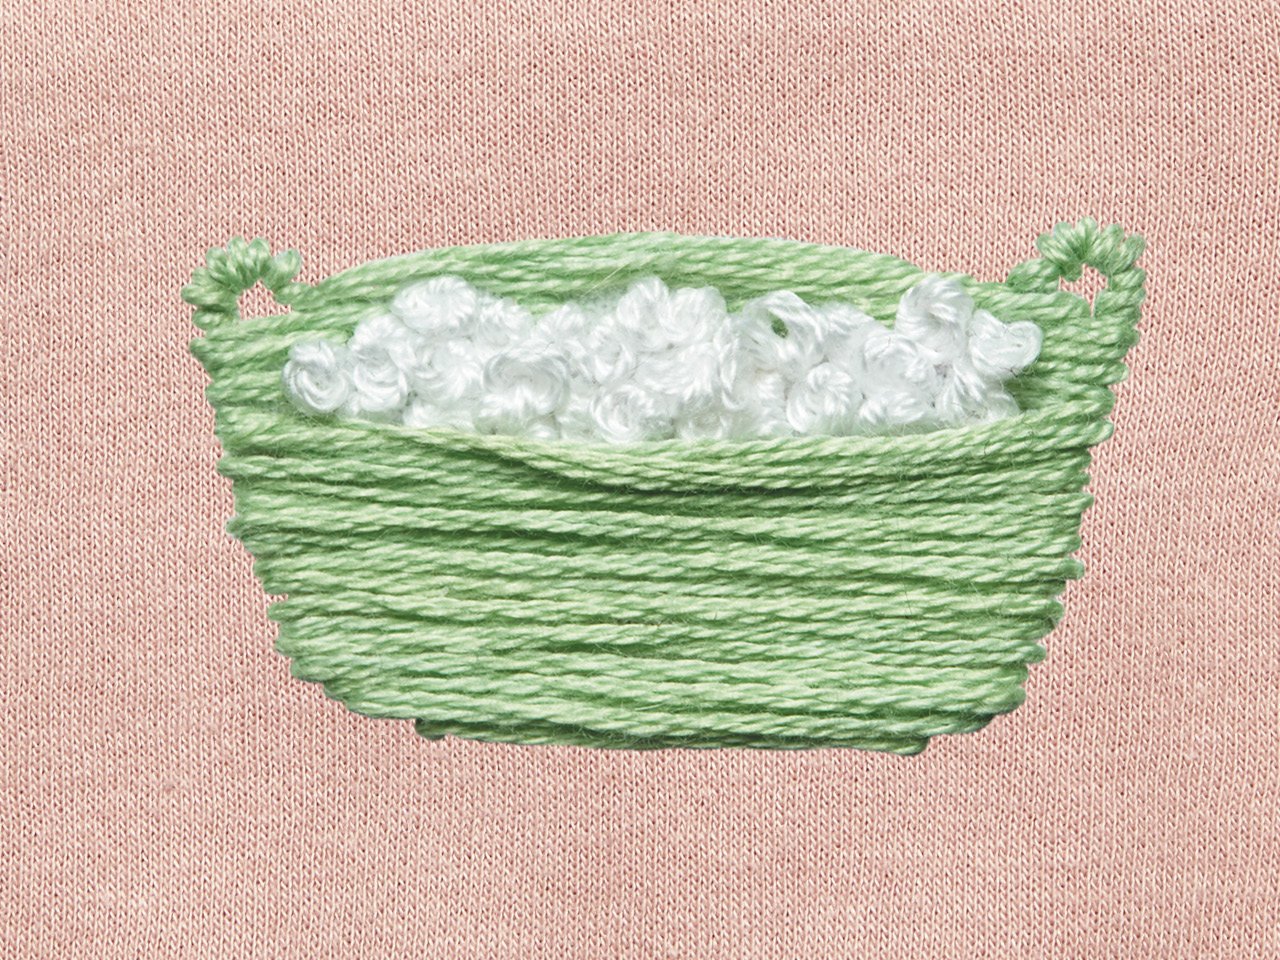 An embroidered green laundry basket with white suds on a pink cloth background